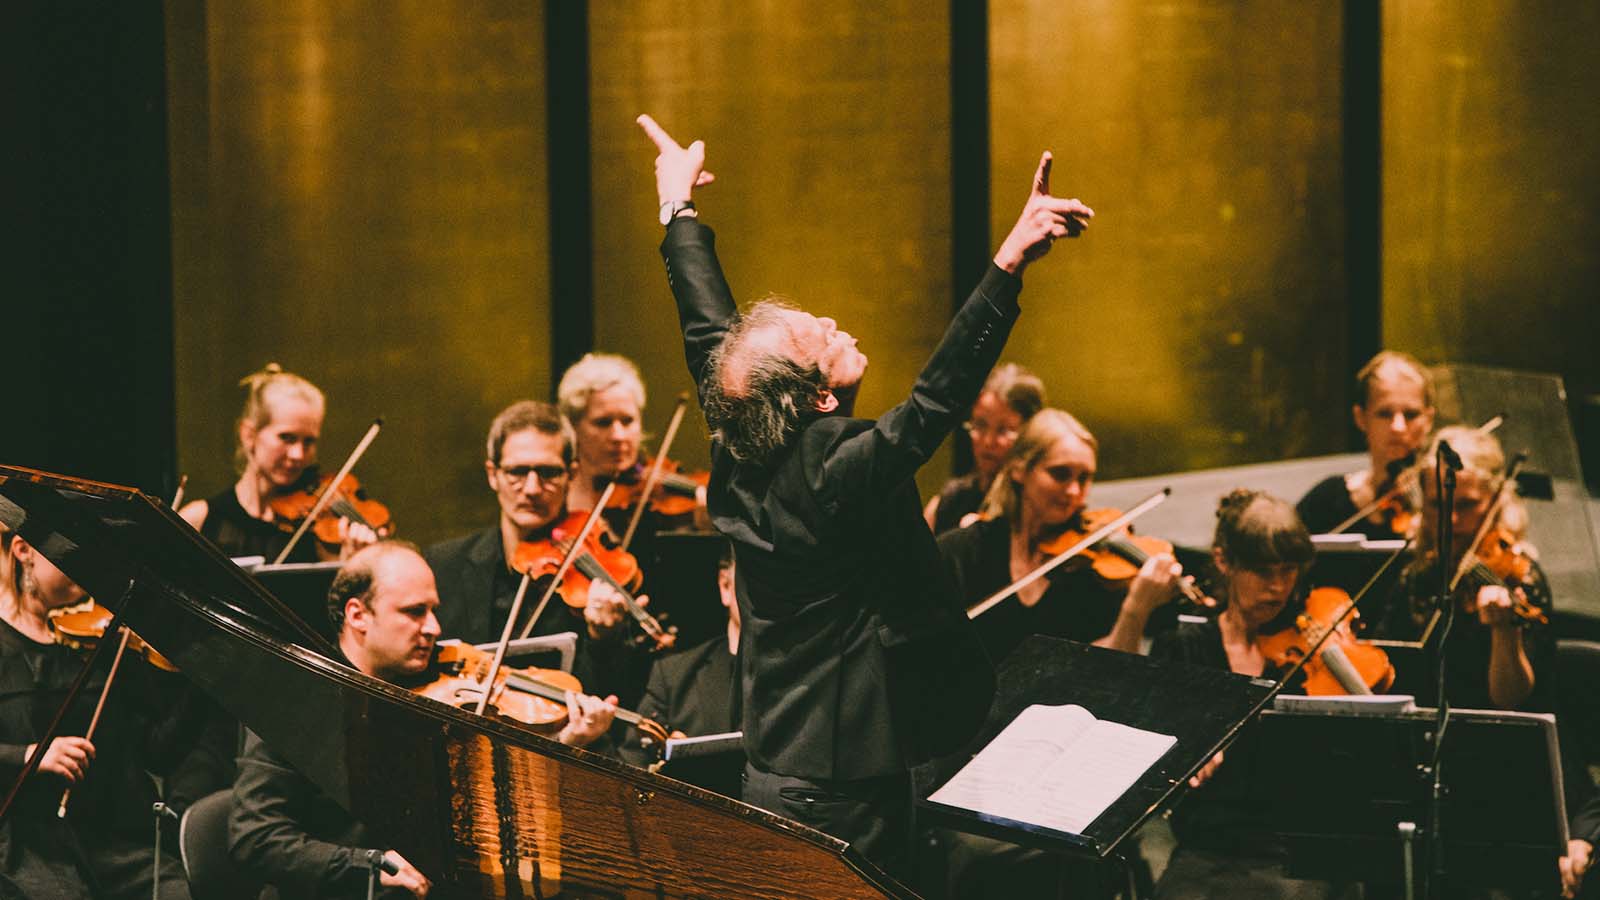 A man (Lars Ulrik Mortensen) gestures passionately with his hands in the air while conducting an orchestra